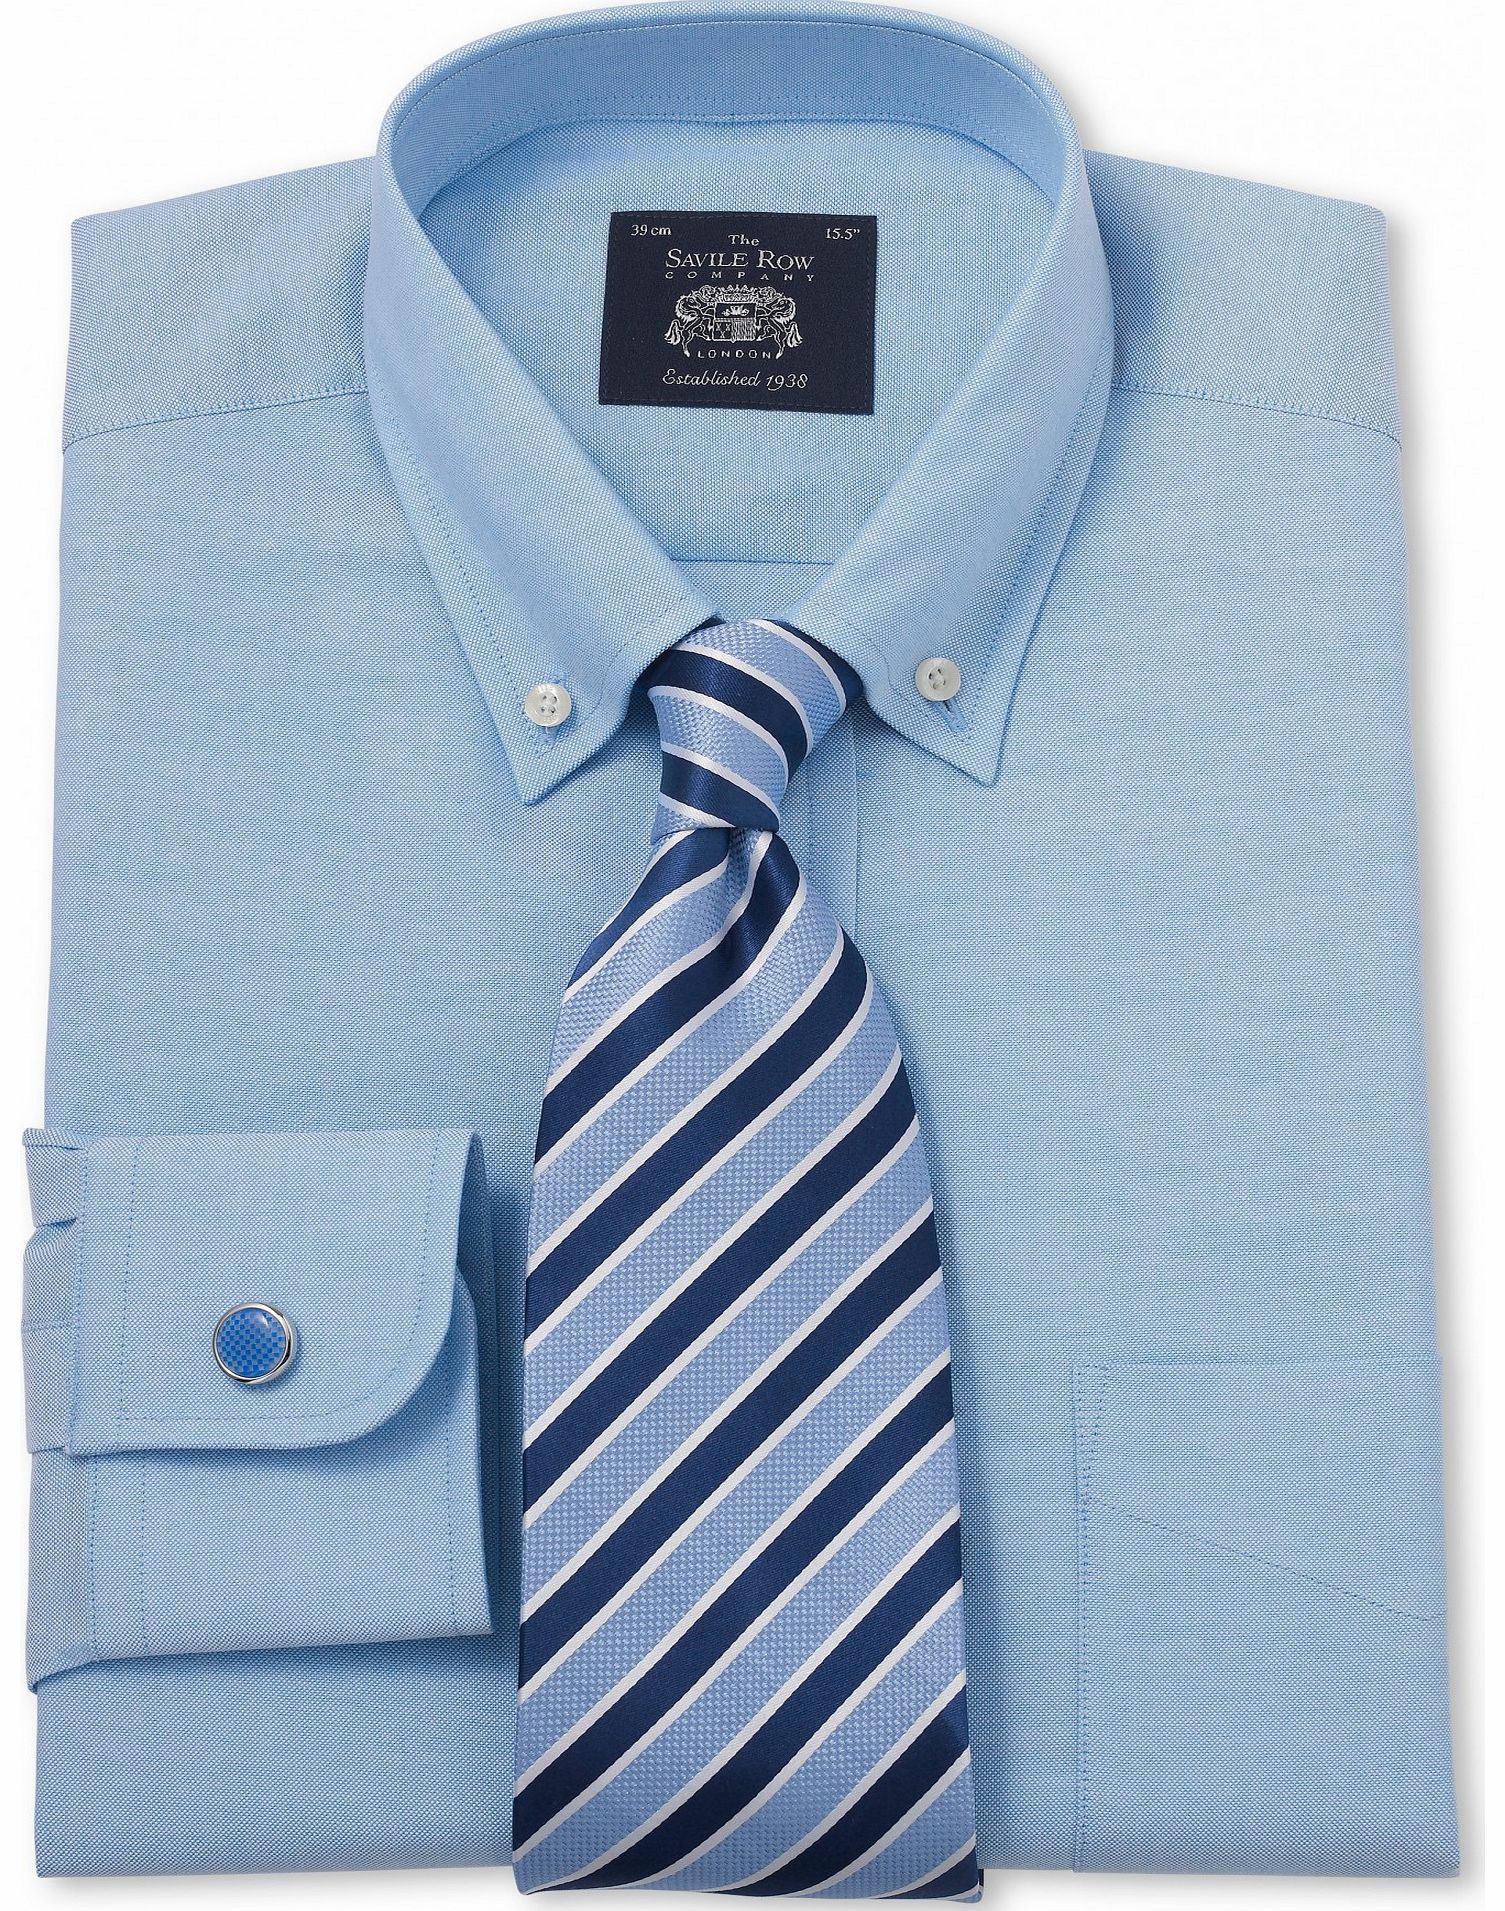 Savile Row Company Blue Pinpoint Classic Fit Shirt 16 1/2``